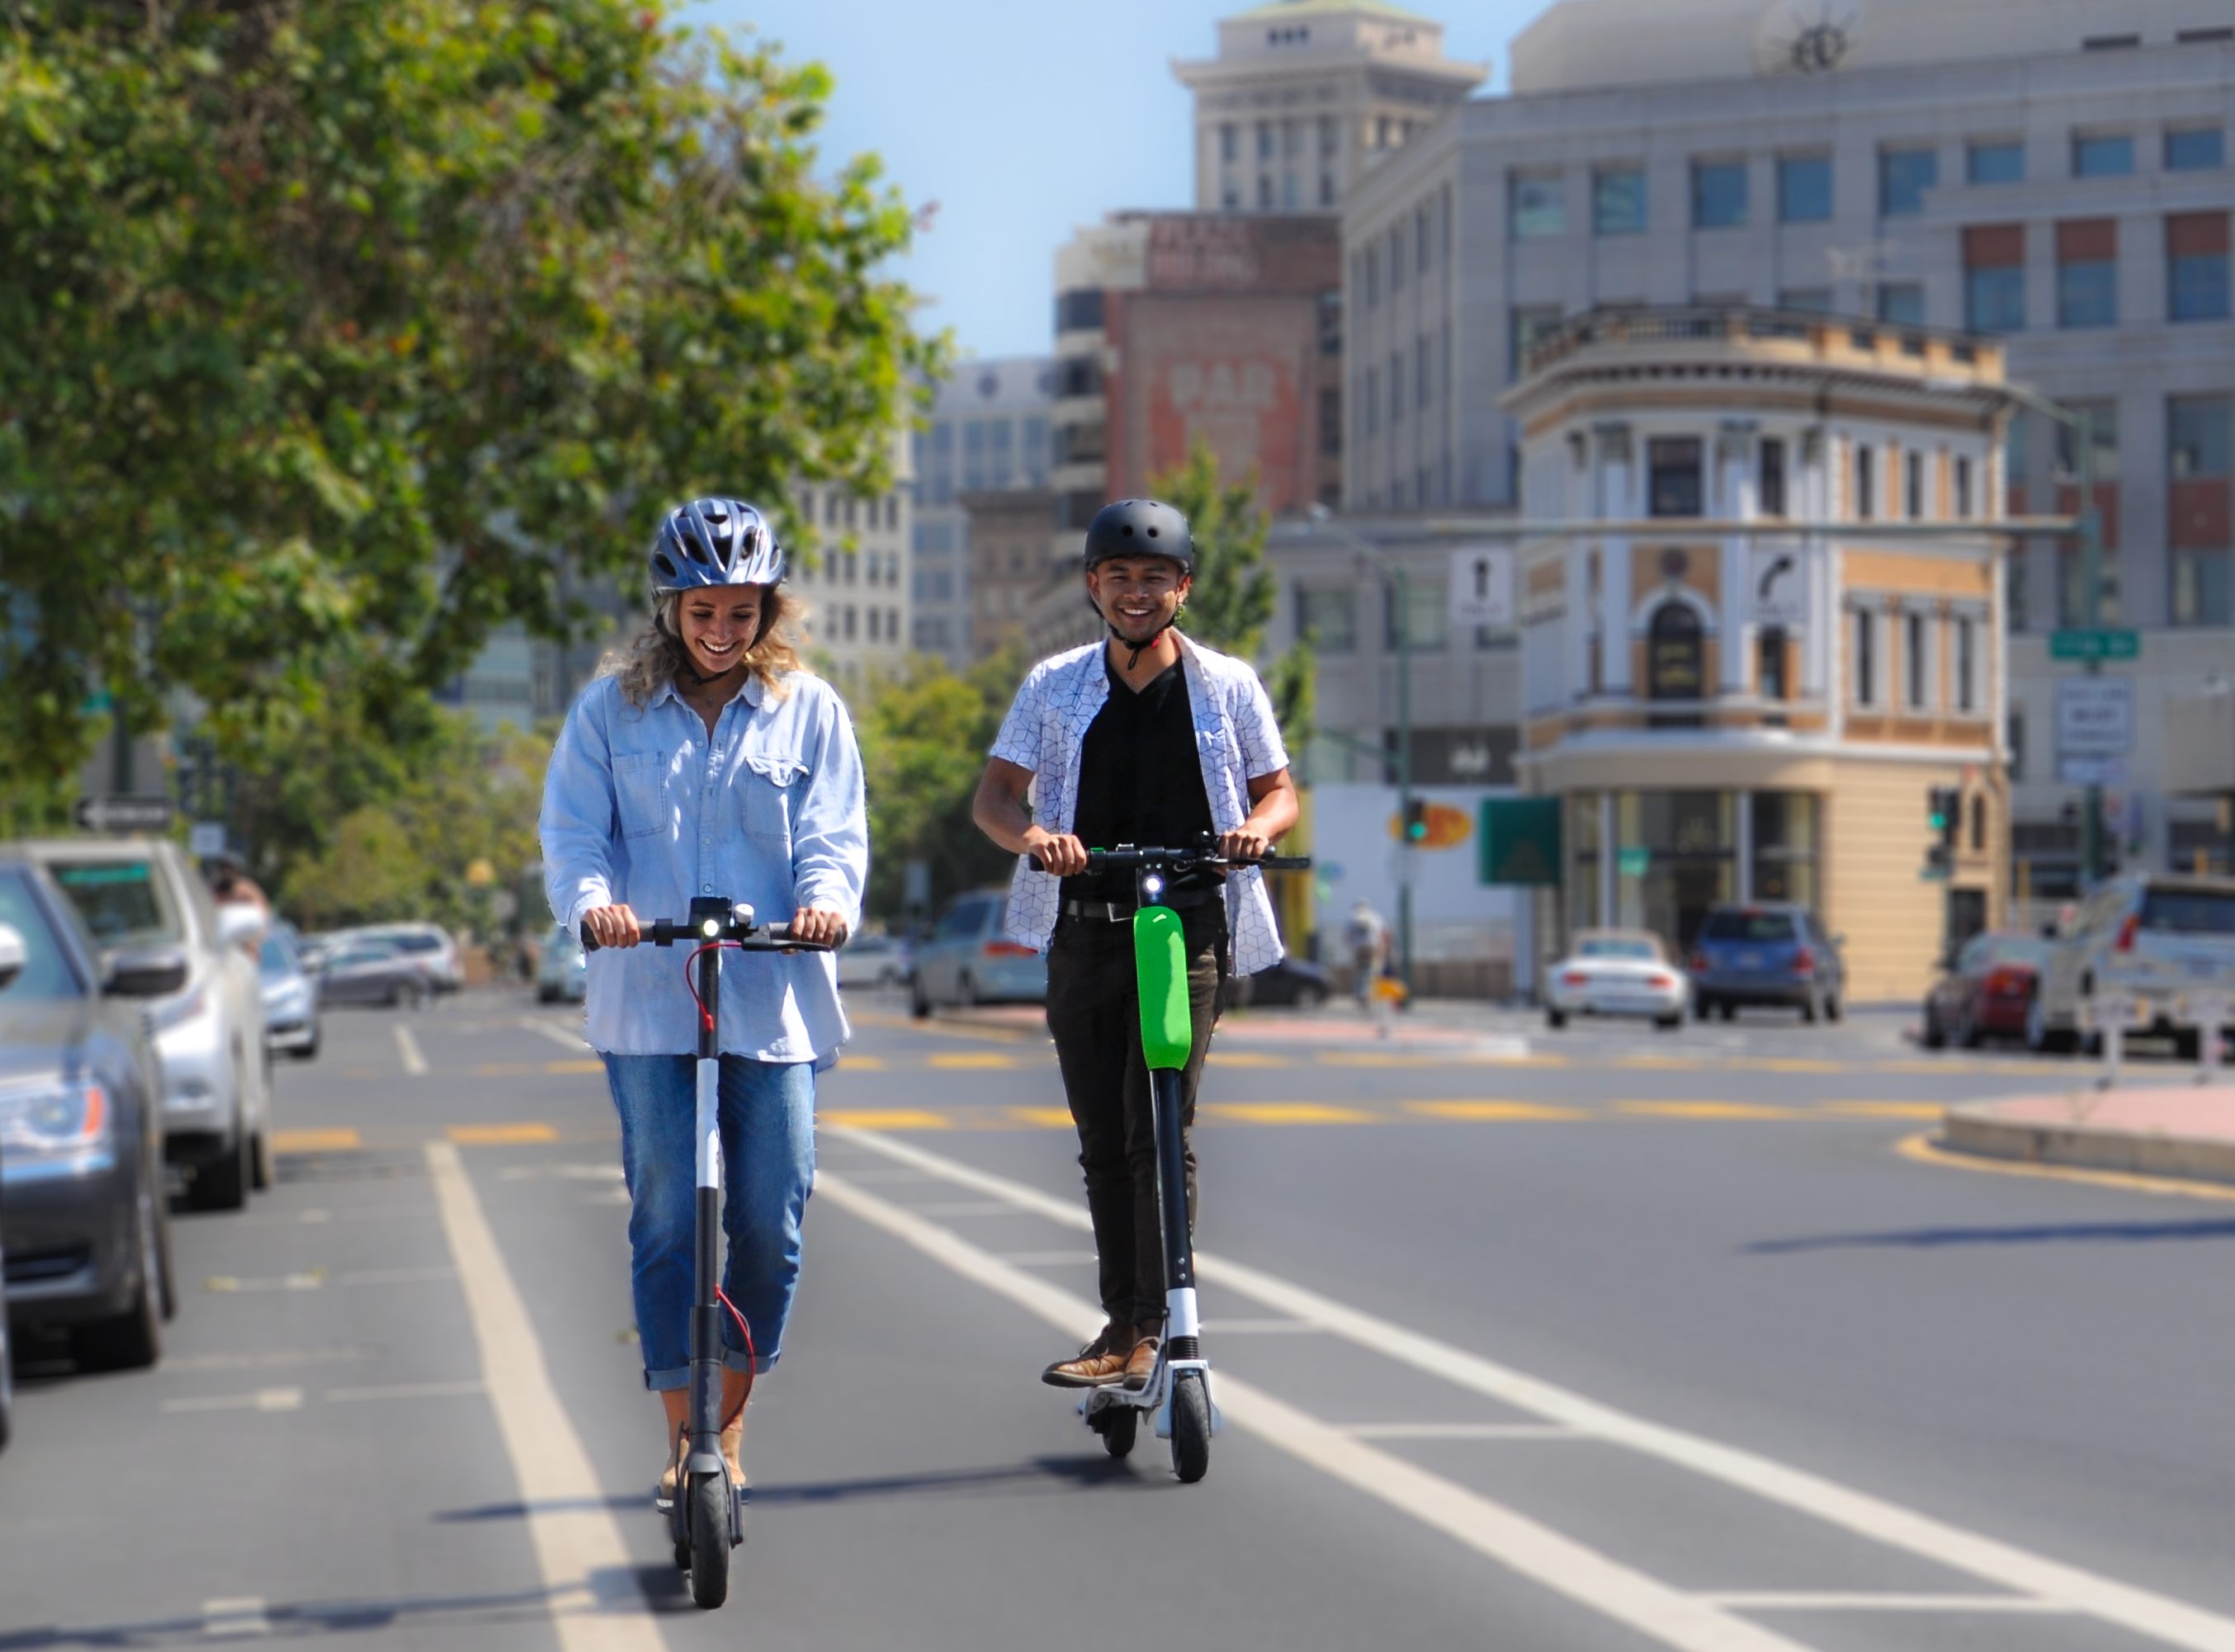 Two people riding e-scooters